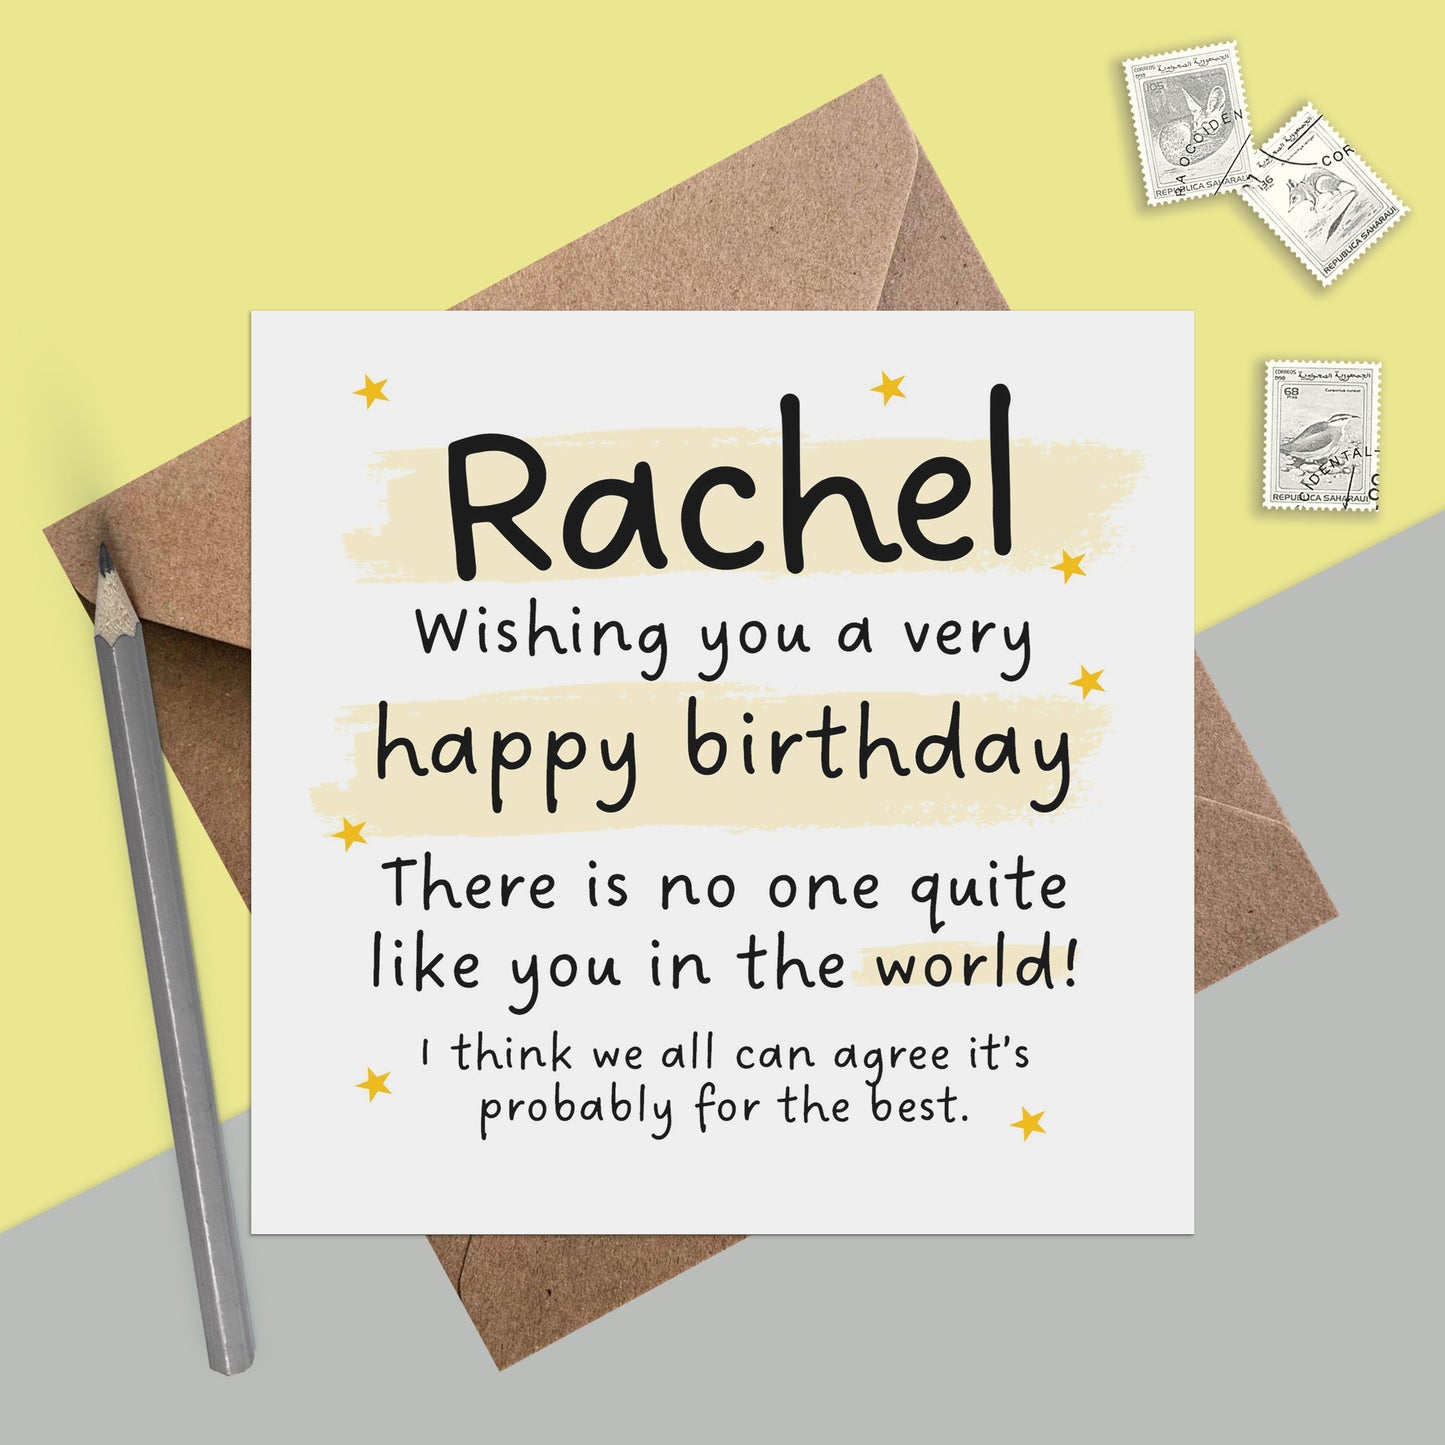 Personalised Funny Birthday Card - No One Like You